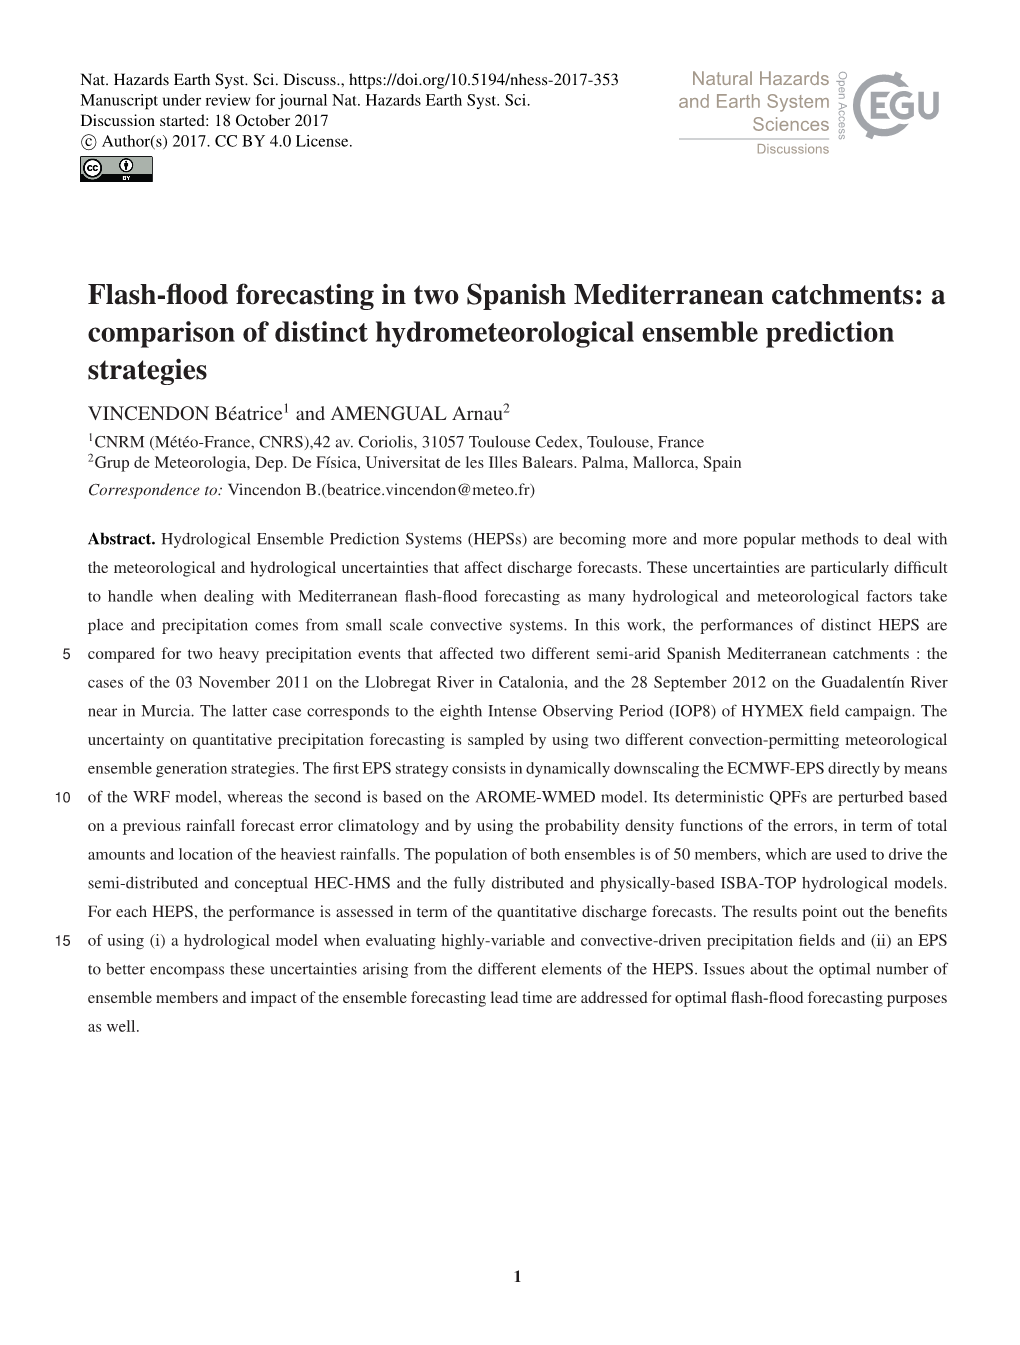 Flash-Flood Forecasting in Two Spanish Mediterranean Catchments: A